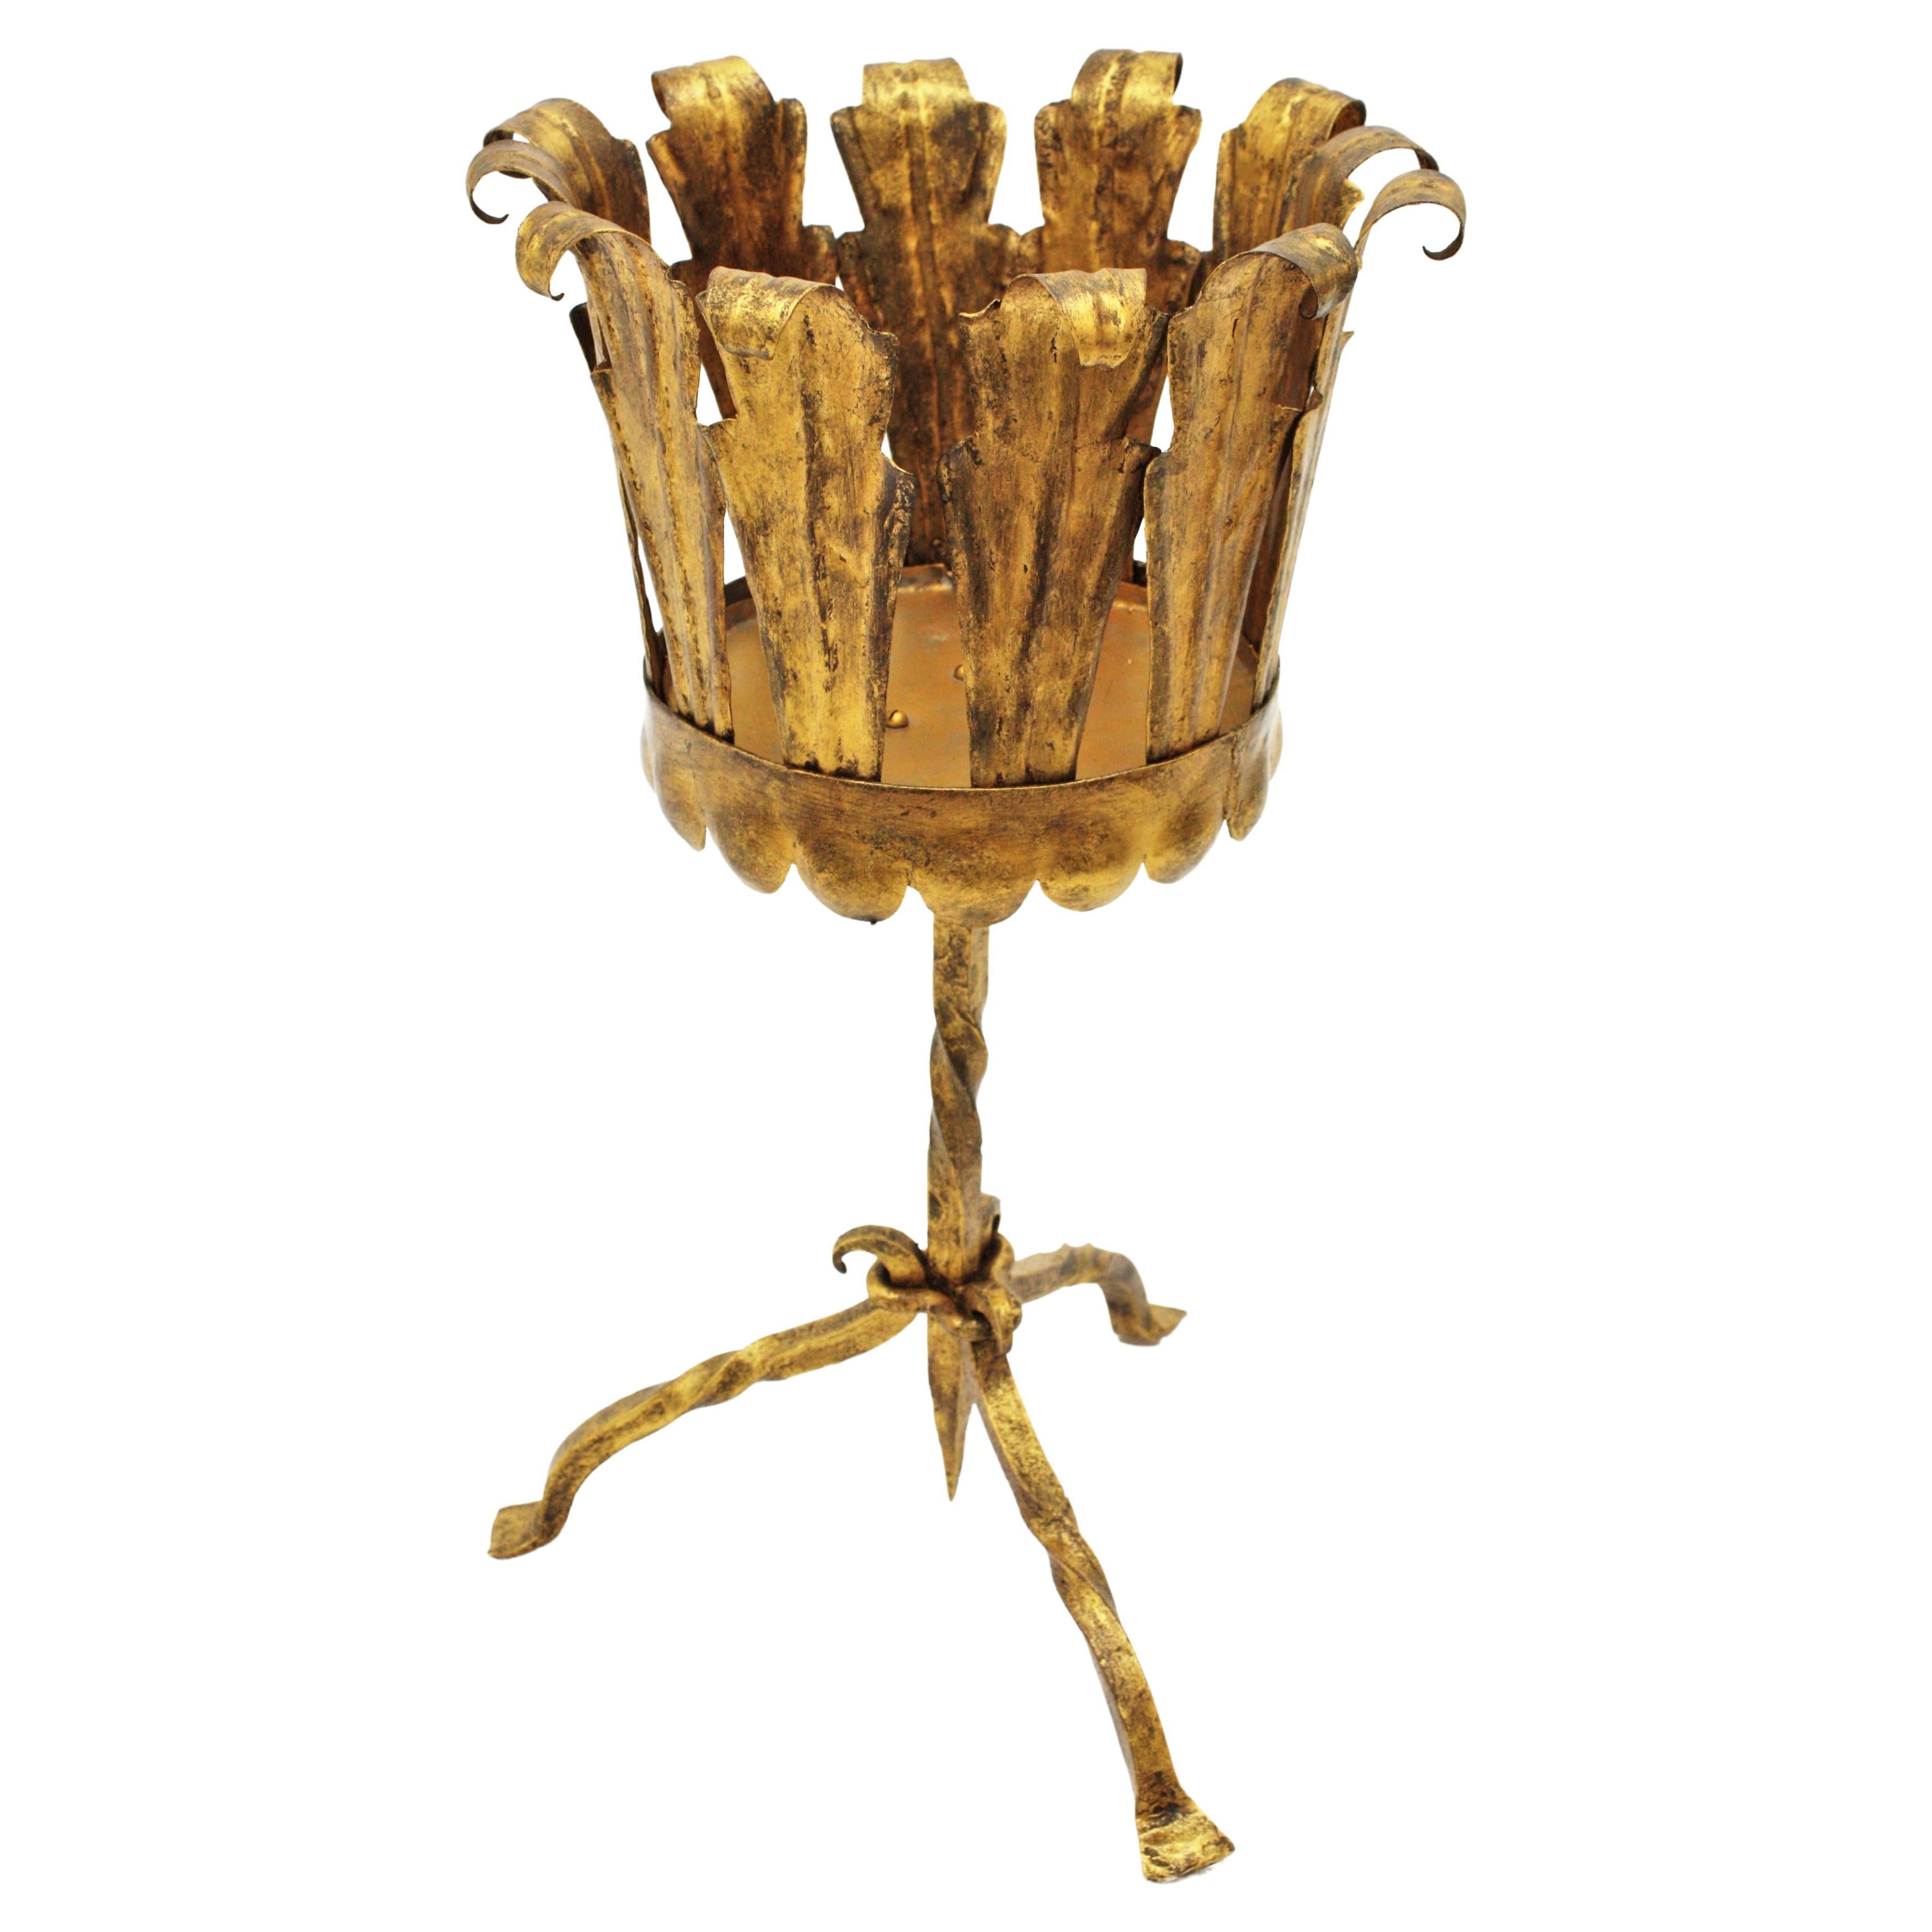 Hand-hammered gilt iron leafed Gothic style planter manufactured at the Mid-Century Modern period, Spain, 1950-1960.
Beautiful to place as a set with other gilt iron stands or gueridon tables.
It can be used as a planter or bottle stand / bar corner